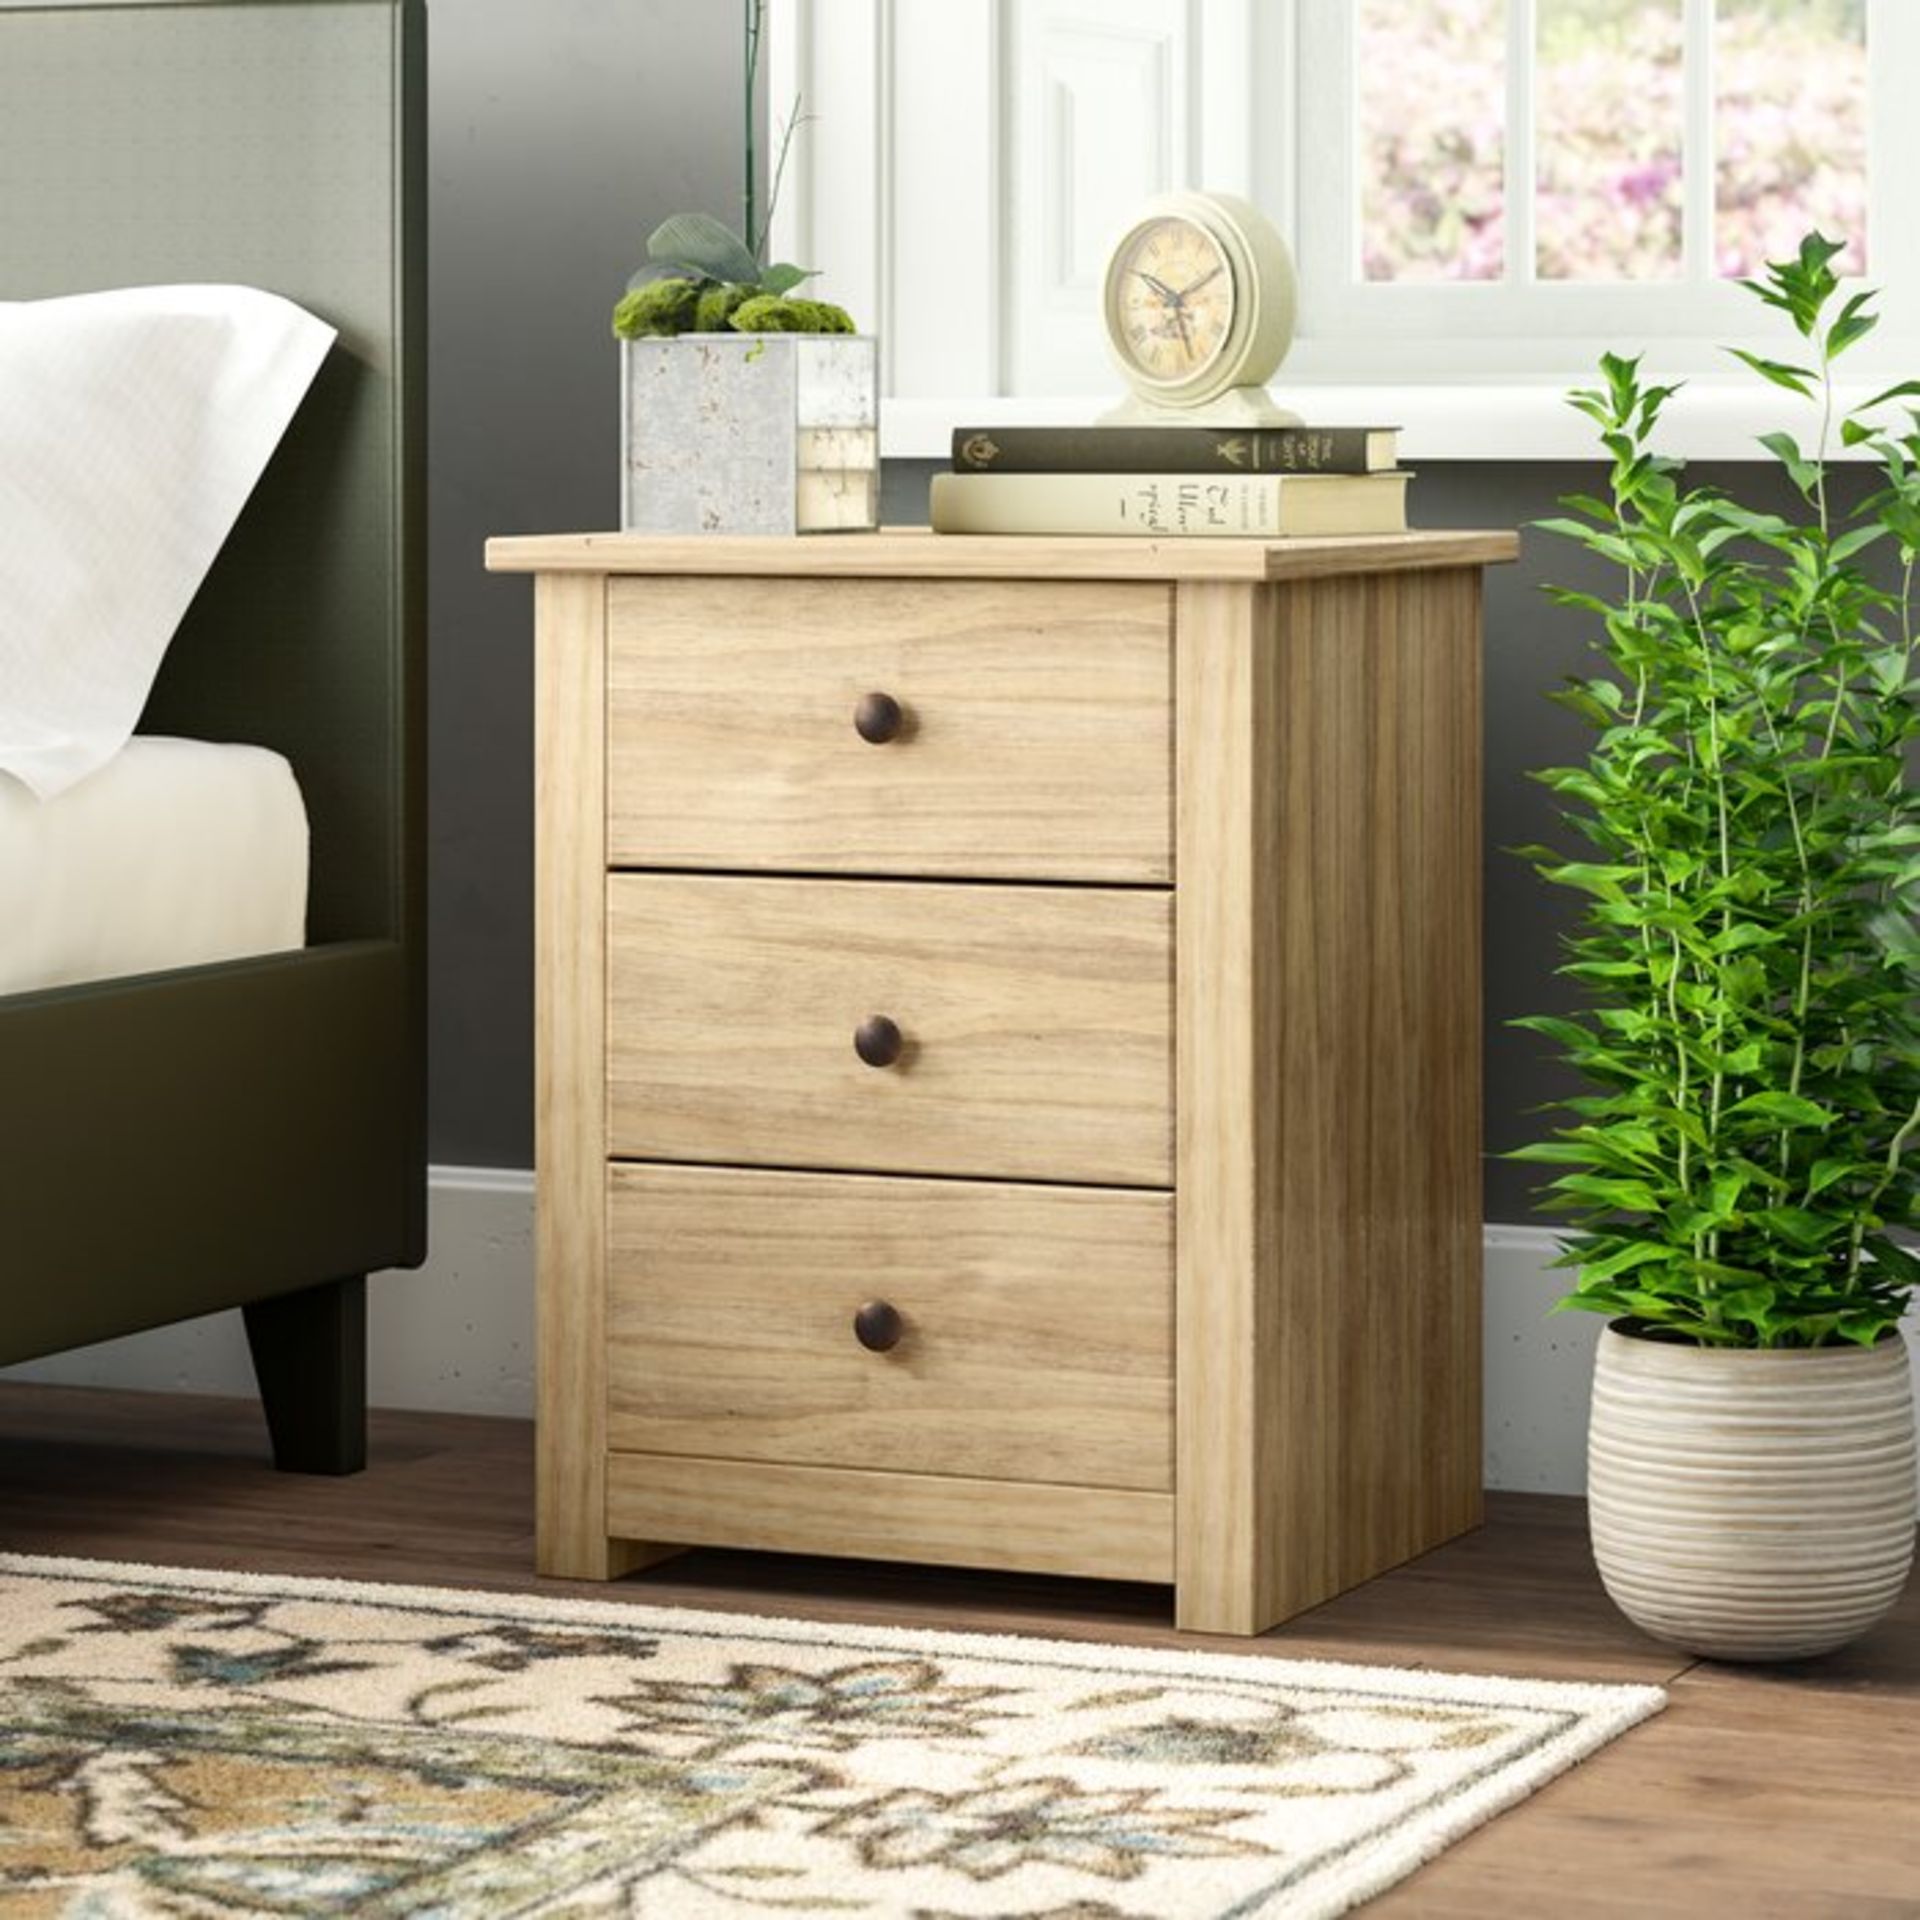 Weiss 3 Drawer Bedside Table - RRP £73.99